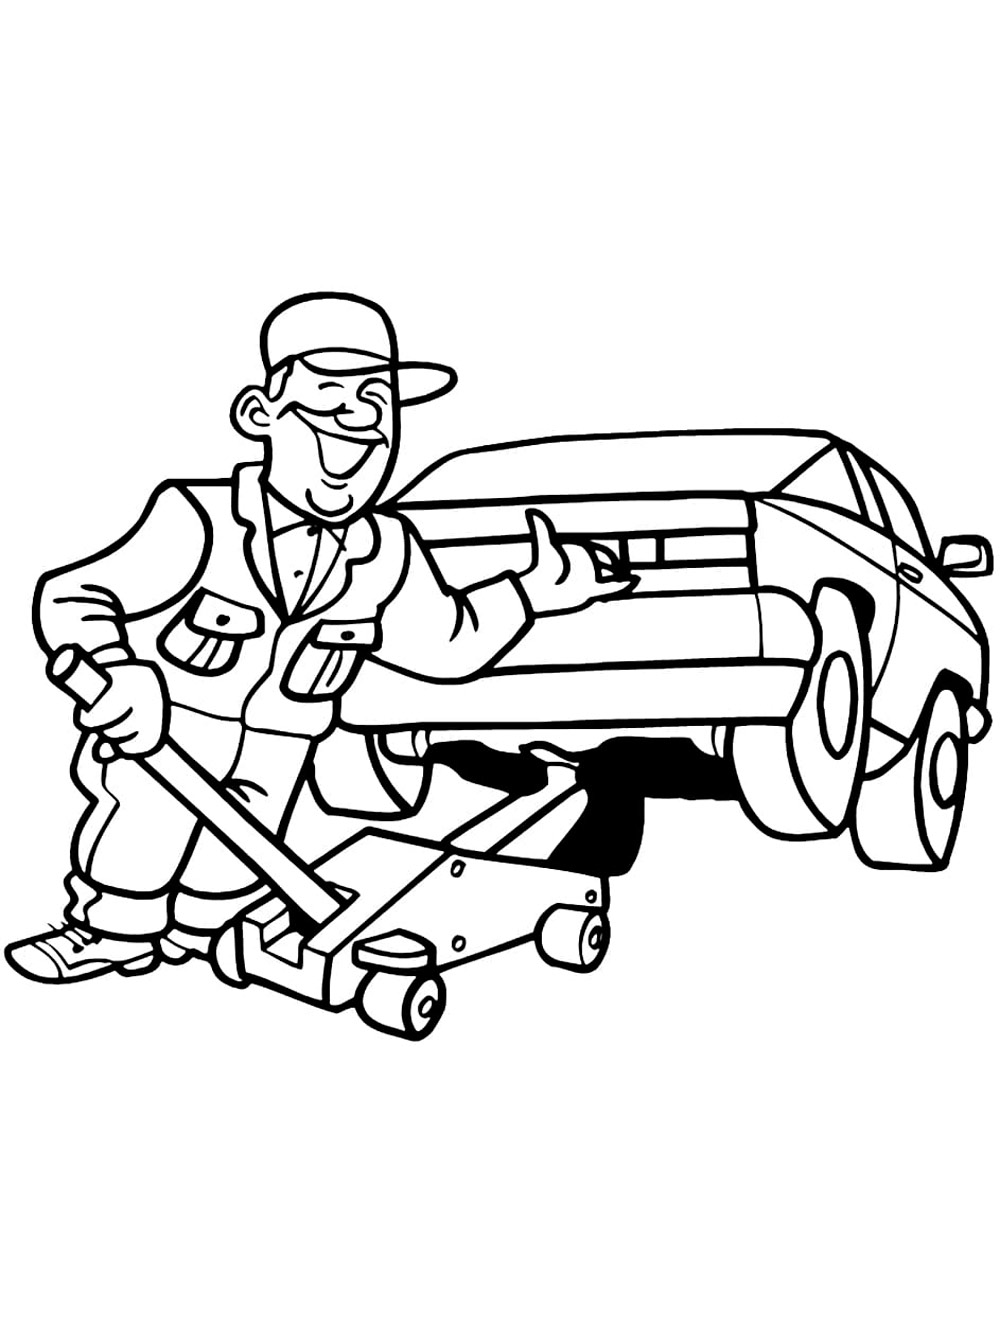 Auto Mechanic Lifting Car Coloring Pages